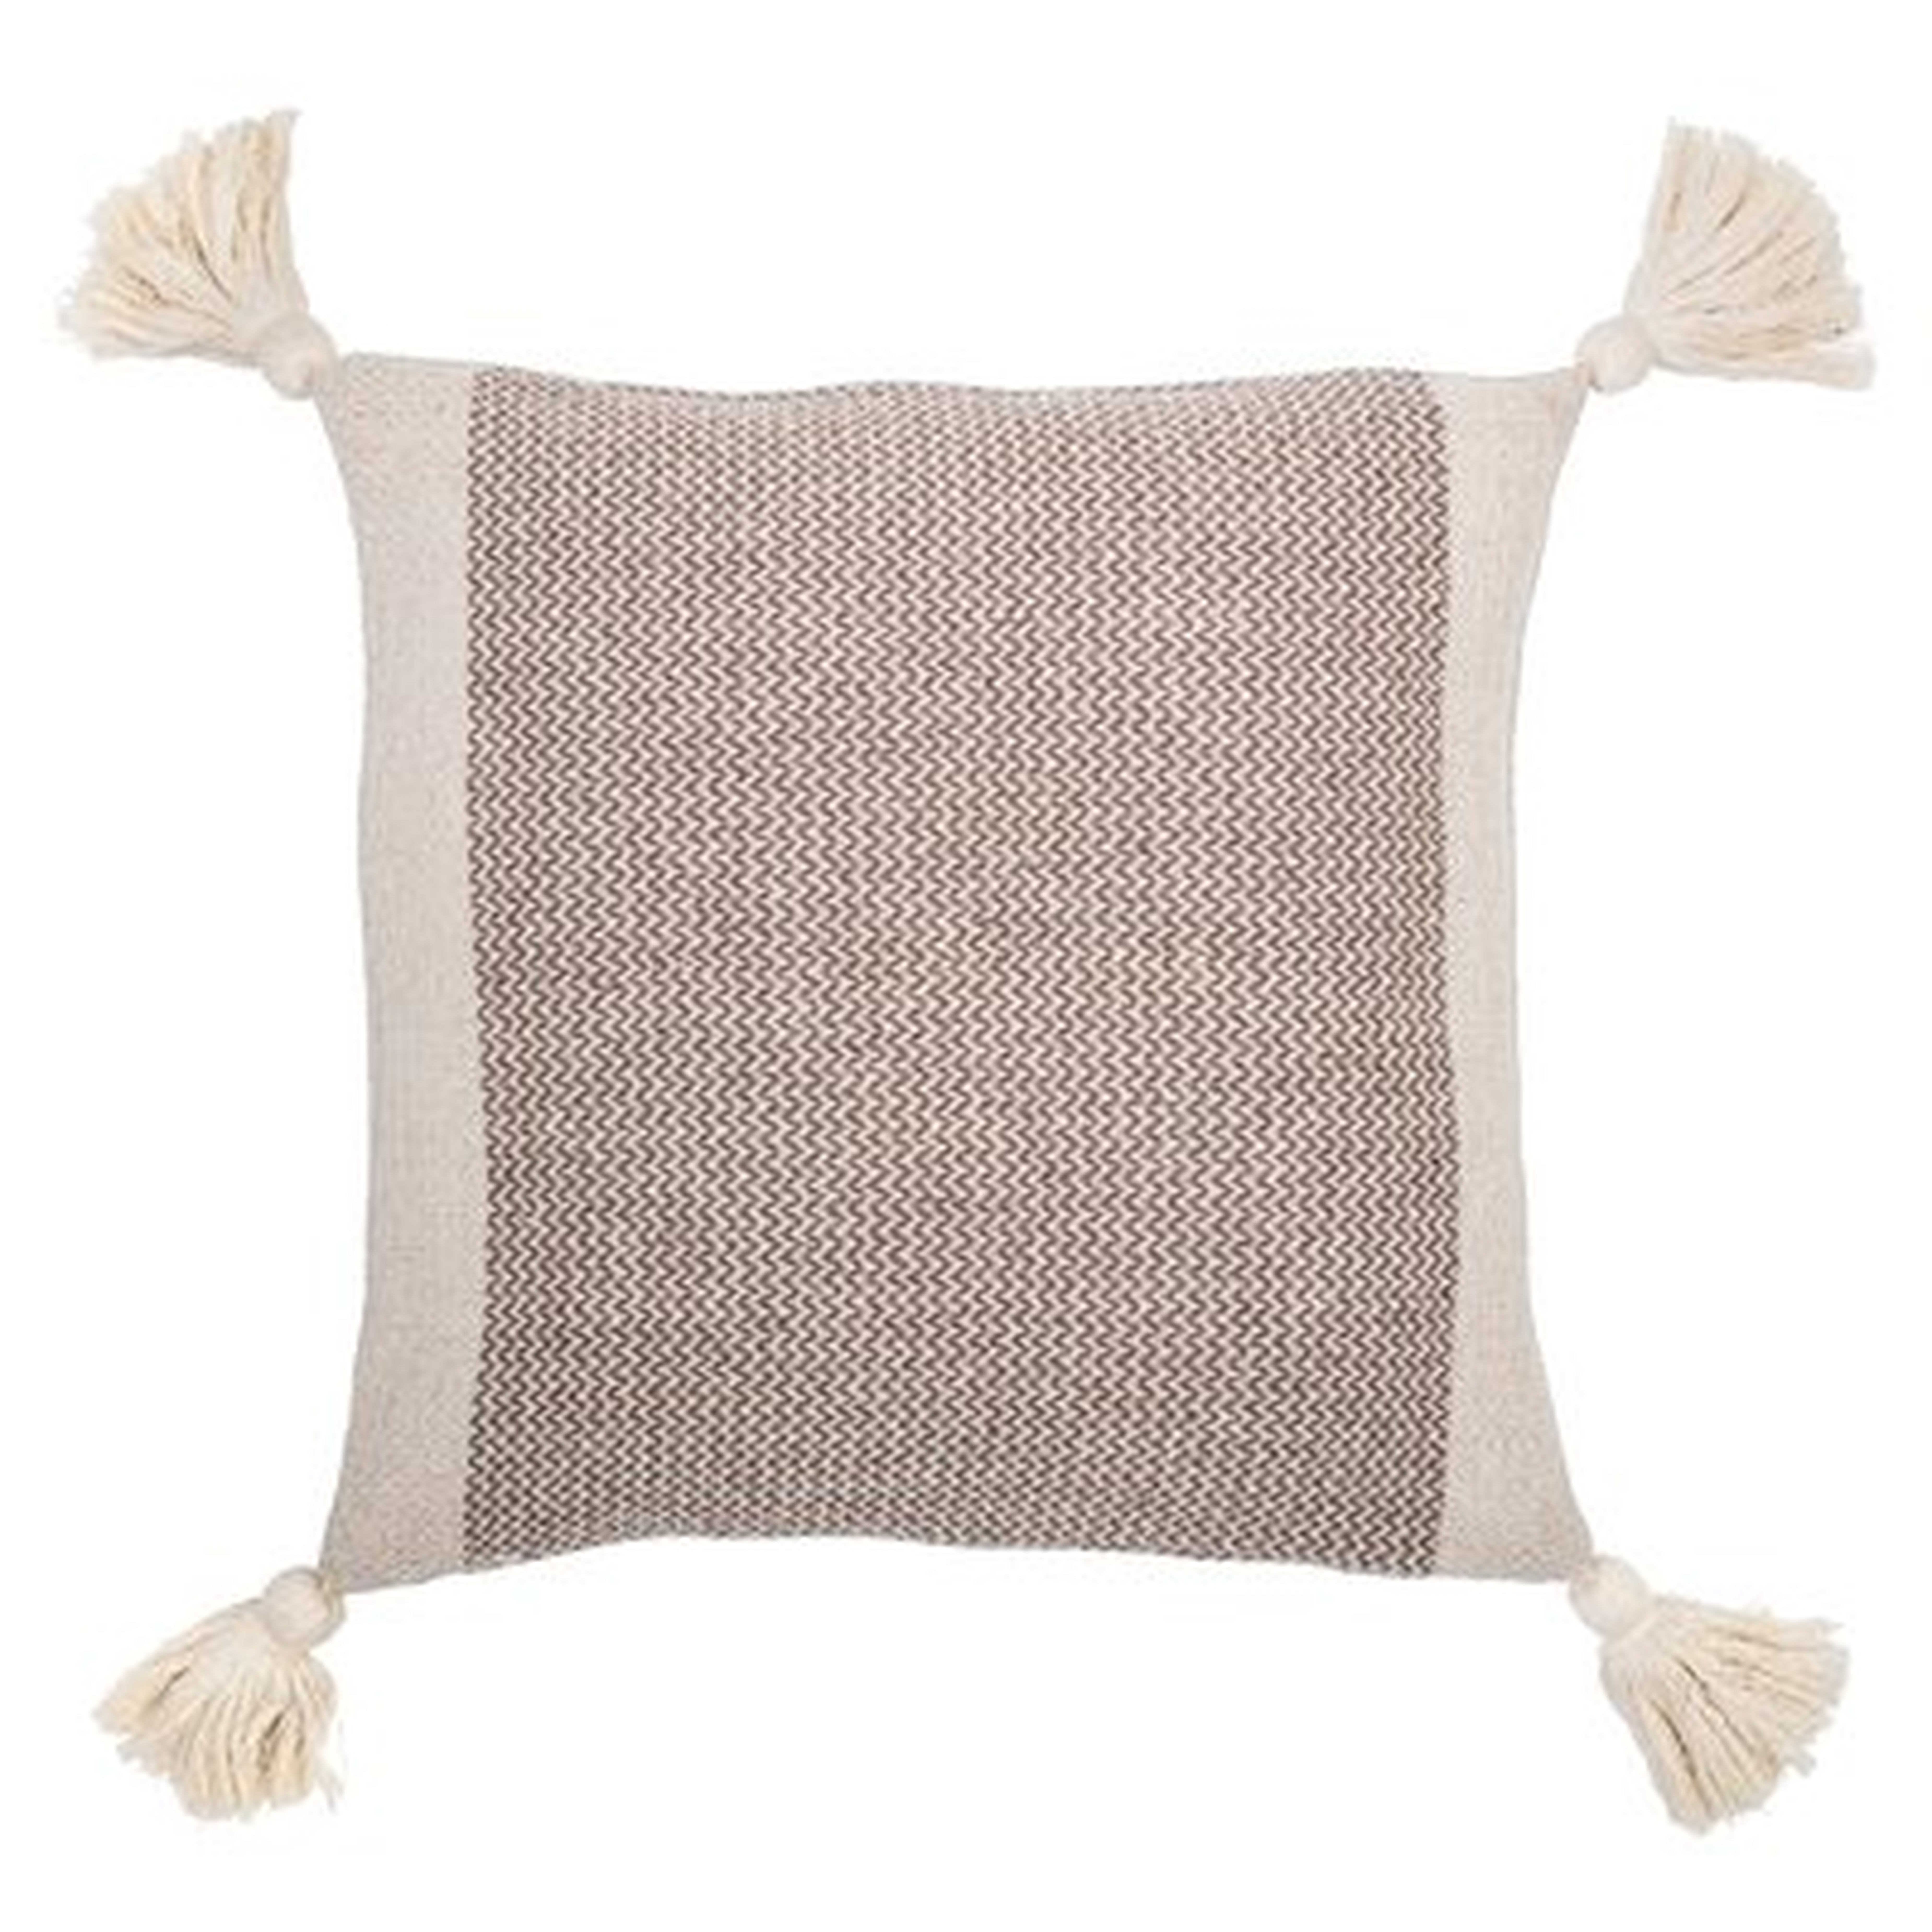 Richeson Square Pillow Cover and Insert - Birch Lane